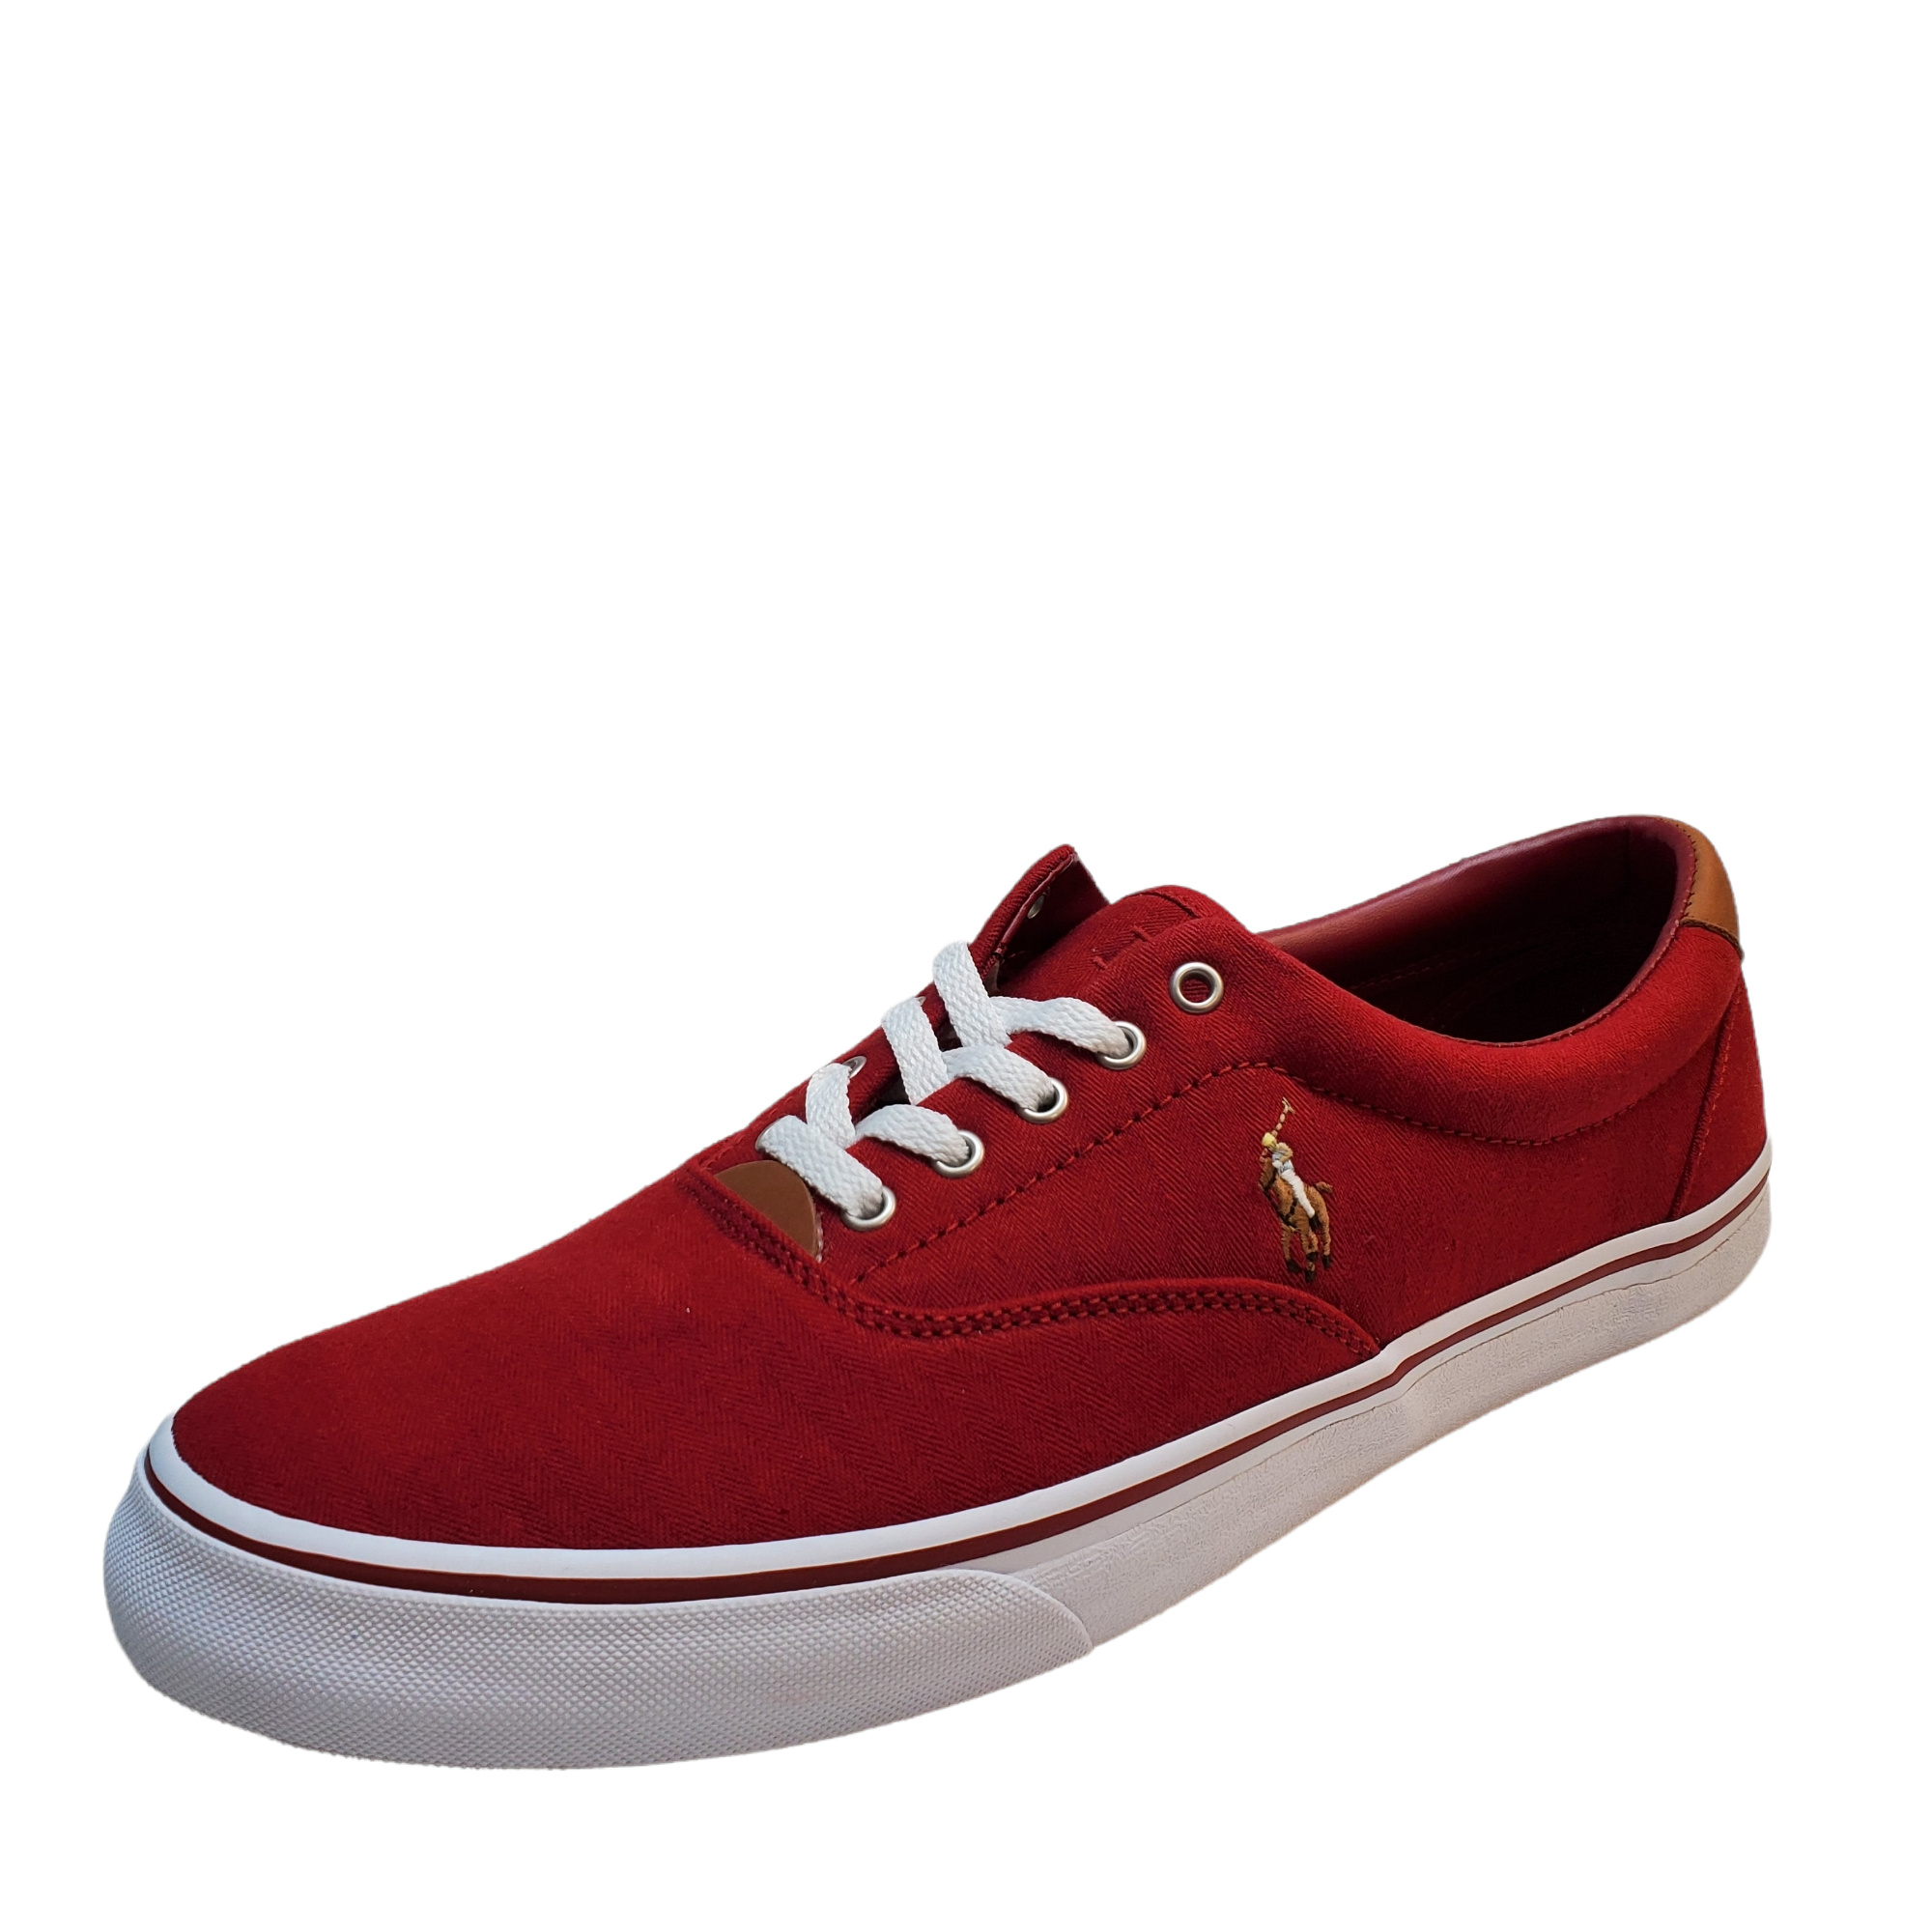 Polo Ralph Lauren Men's Shoes Thompson Wash Twill Slip On Sneakers 8D Red  Affordable Designer Brands